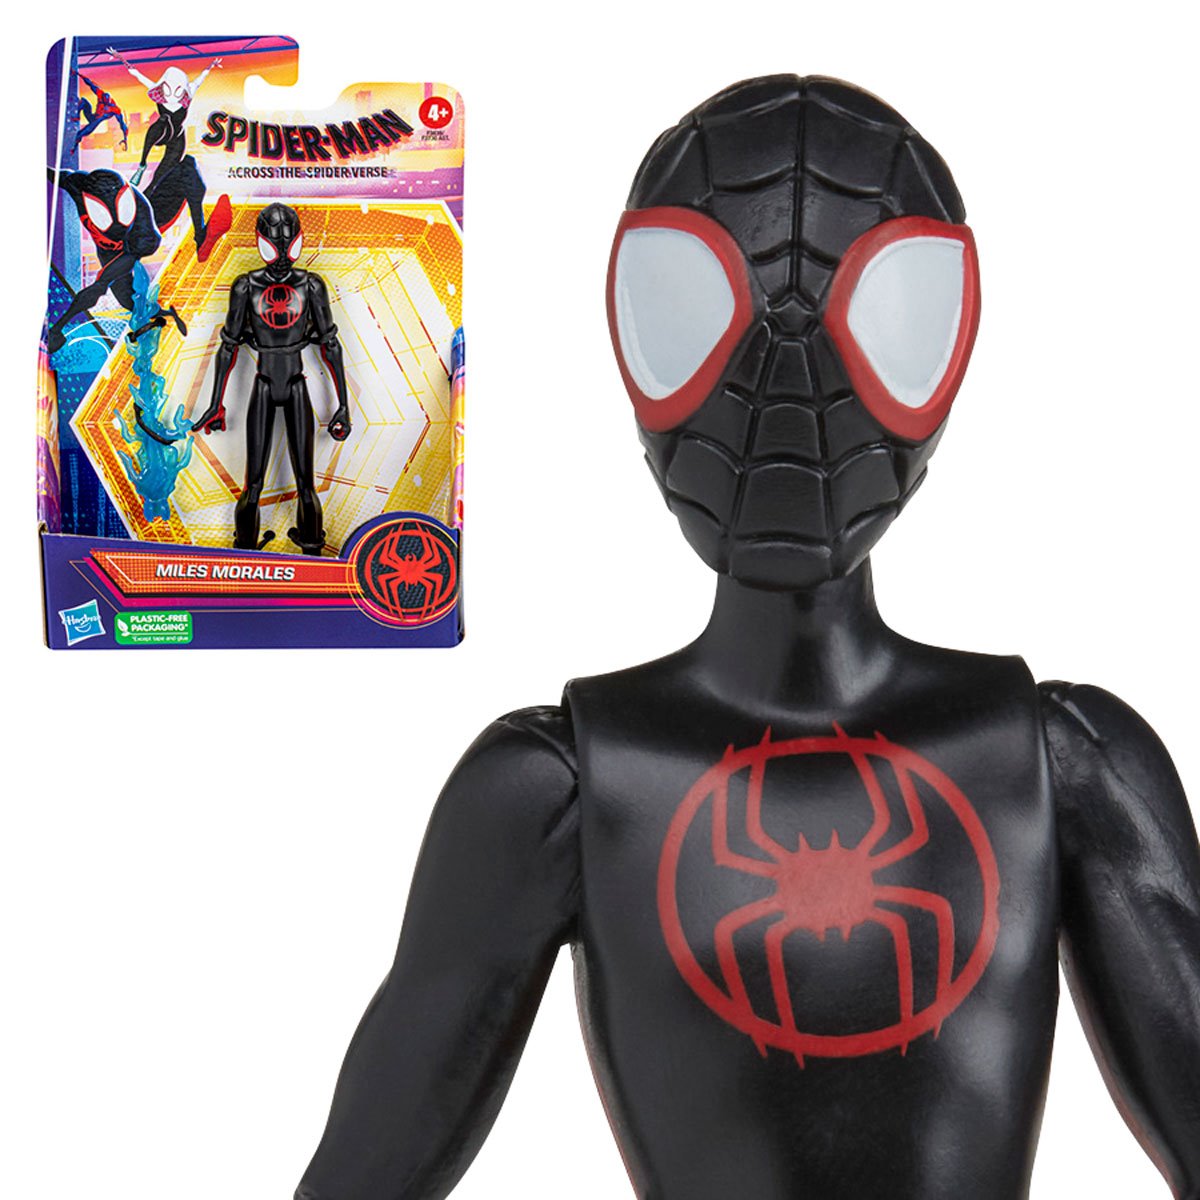 spiderman across the spiderverse action figure www.sweepspros.com